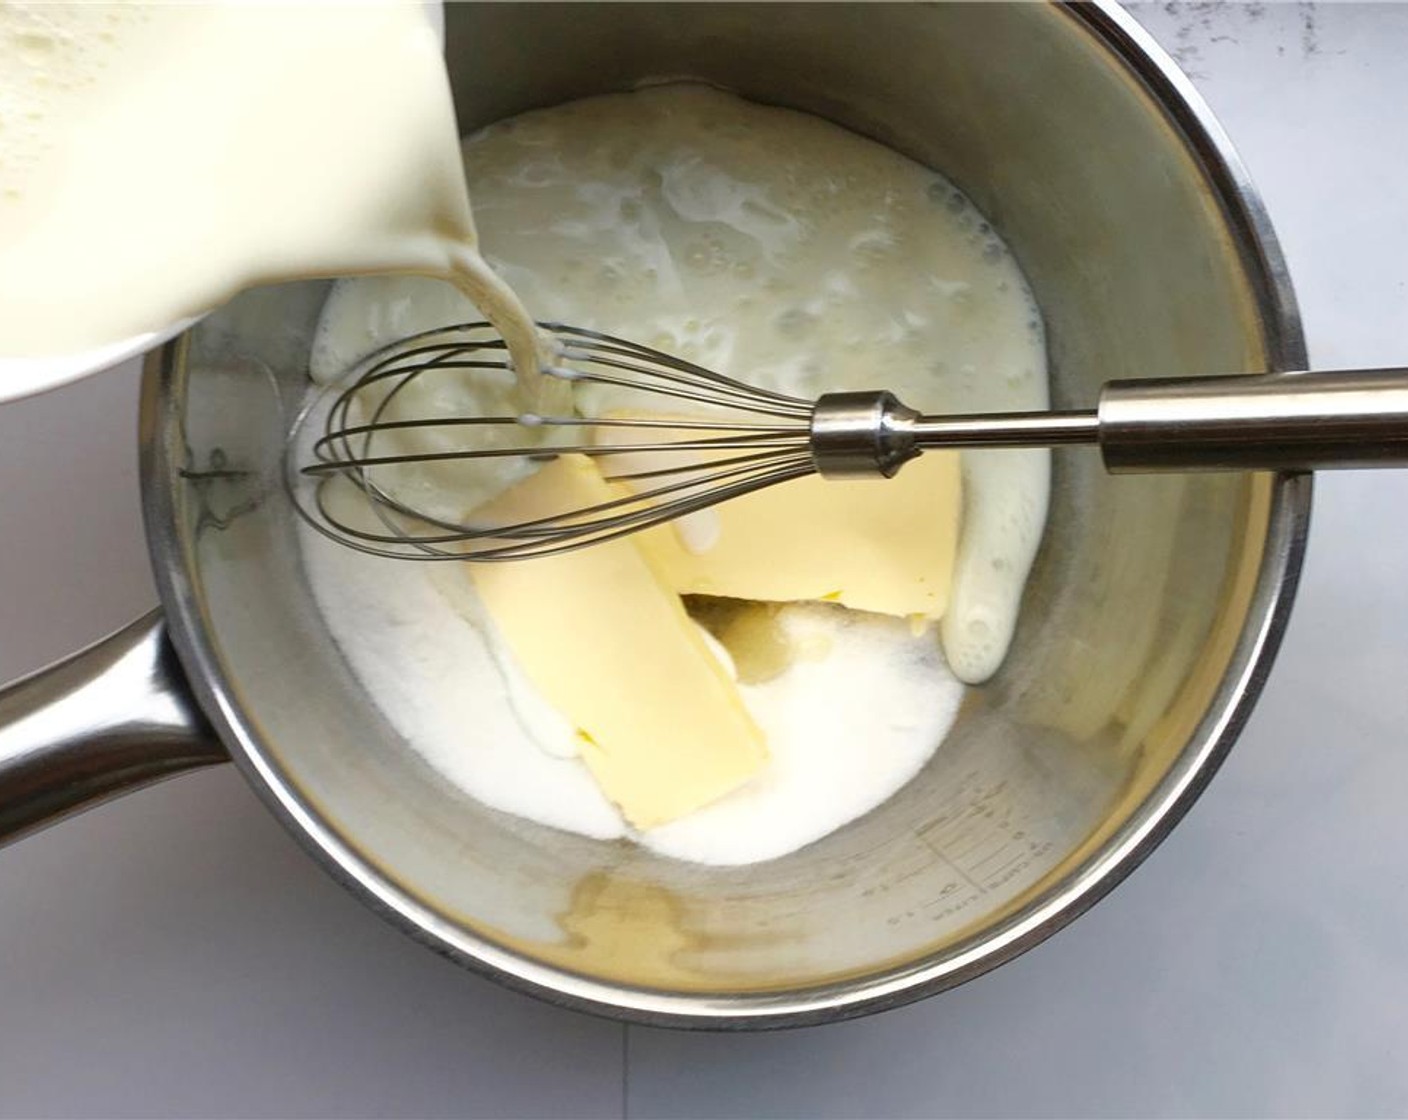 step 1 Pour the Milk (2 cups) and Caster Sugar (1/4 cup) in a large saucepan and add the Unsalted Butter (4 Tbsp) and Vanilla Essence (2 drops).